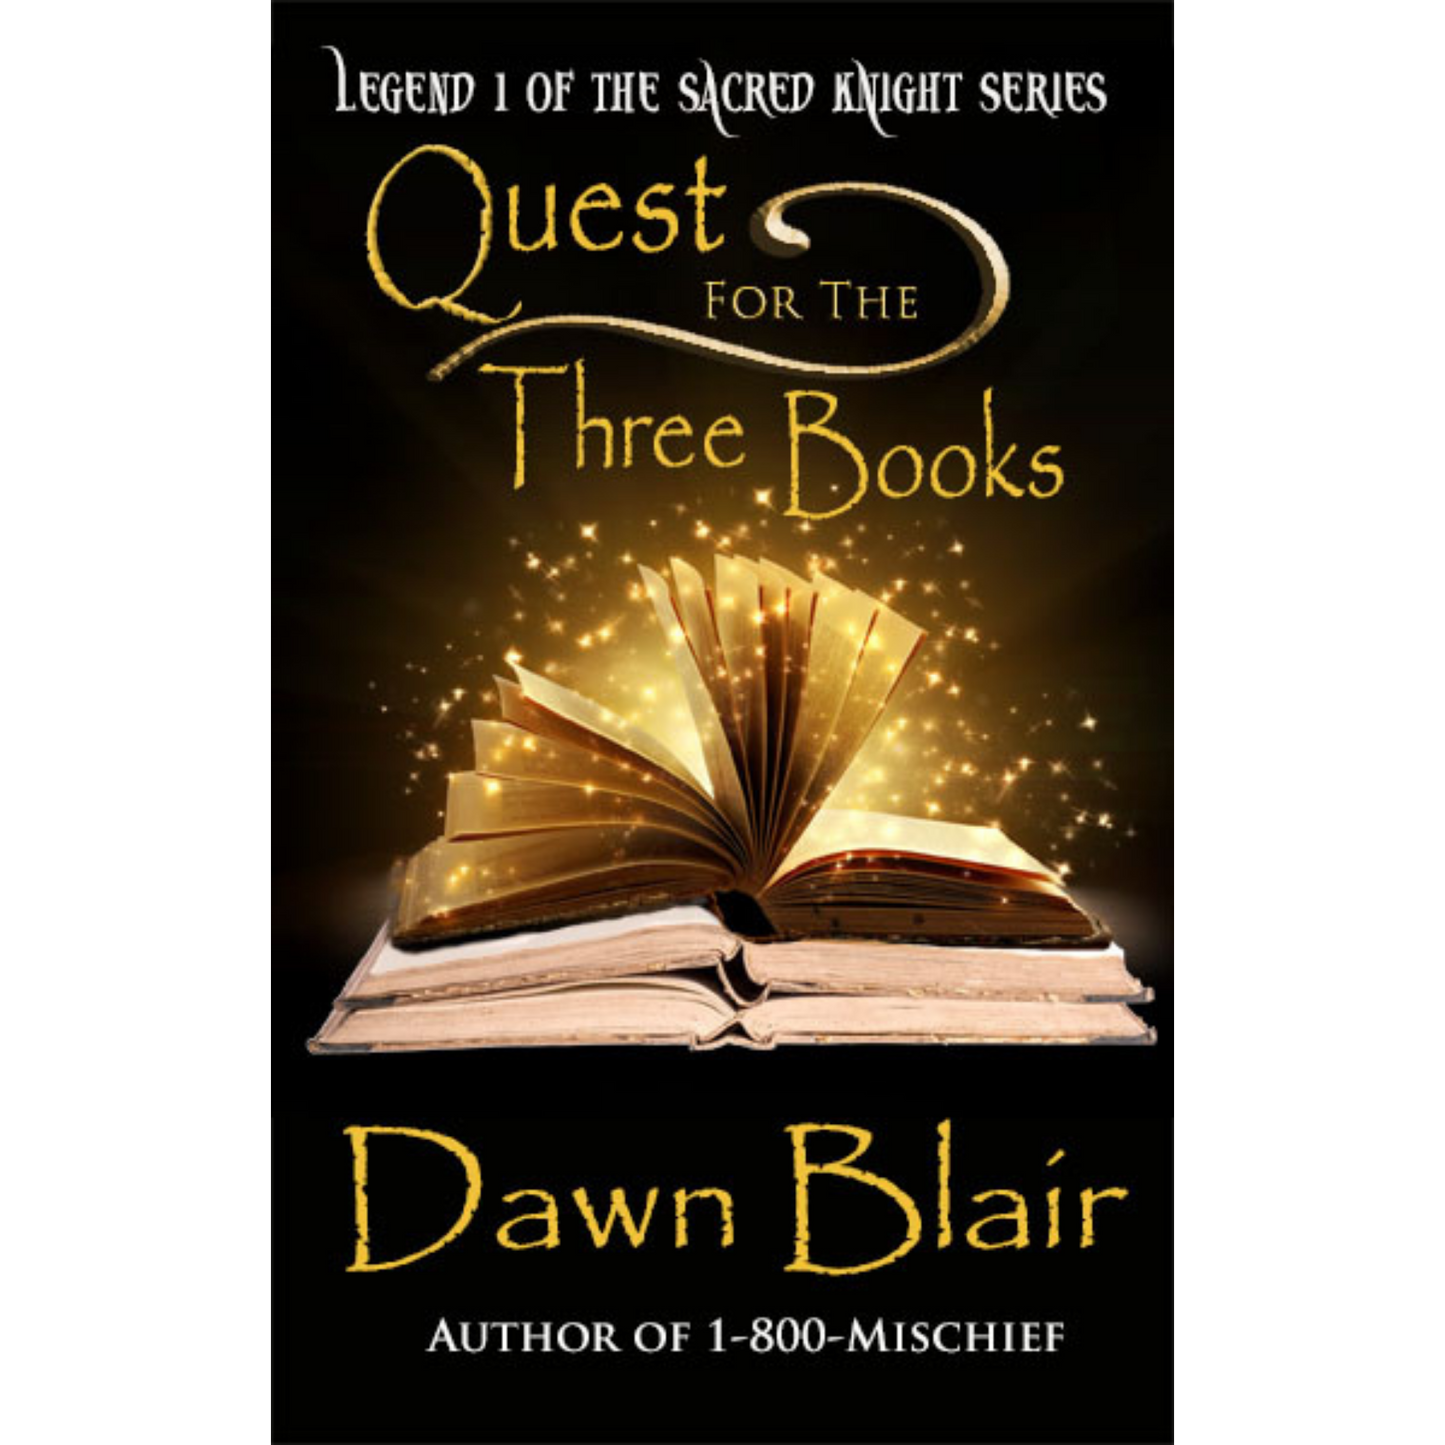 Quest for the Three Books (Legend 1 of the Sacred Knight series)